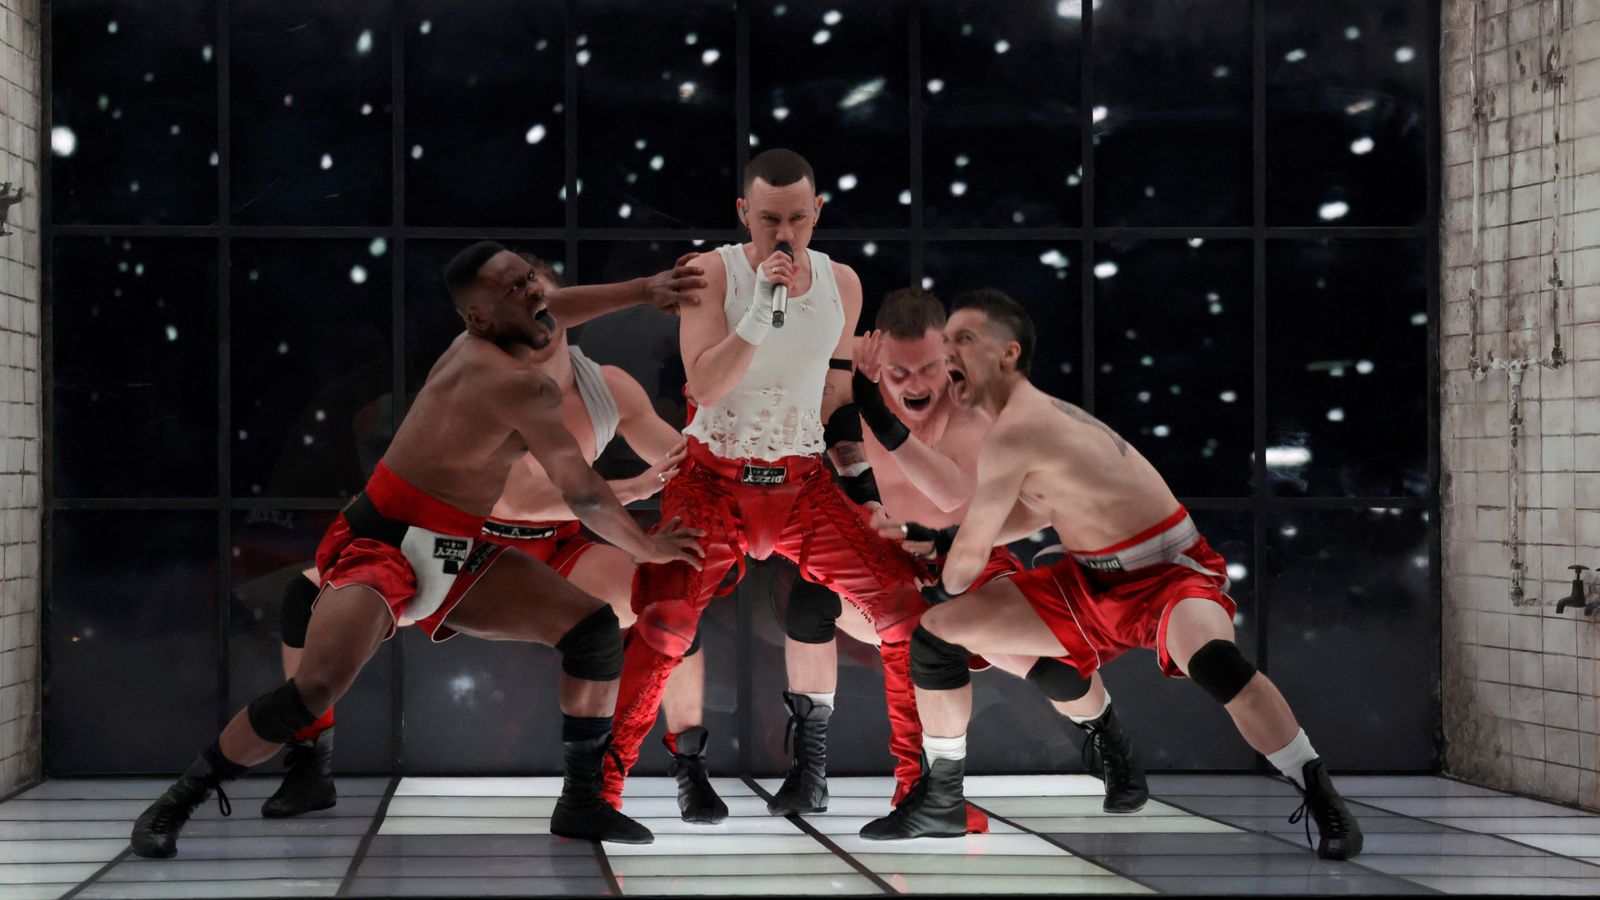 ireland reach eurovision final for first time since 2018 as uk's olly alexander delivers first performance